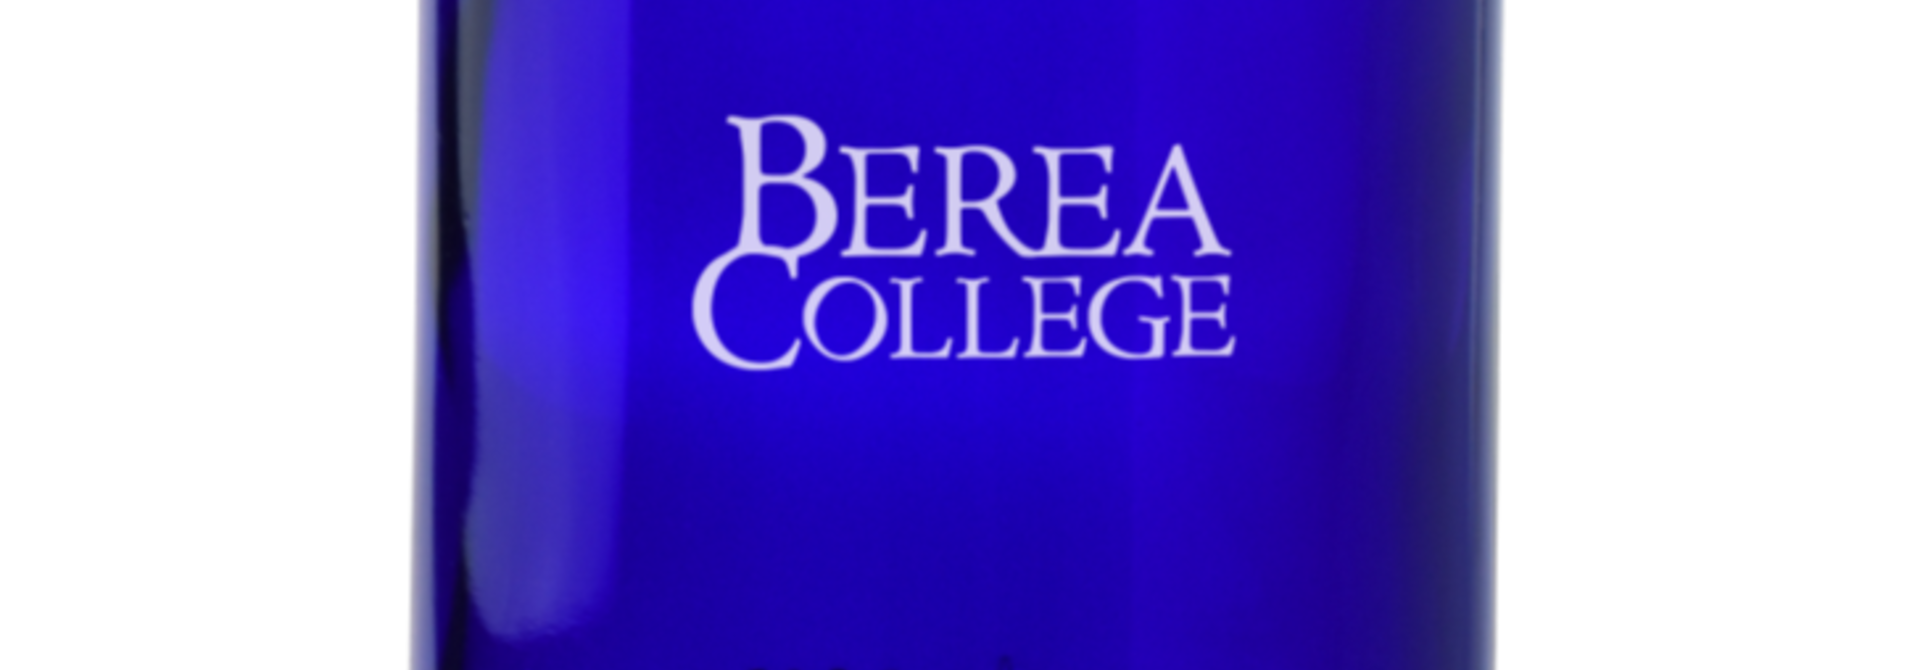 Berea College Recycled Glass